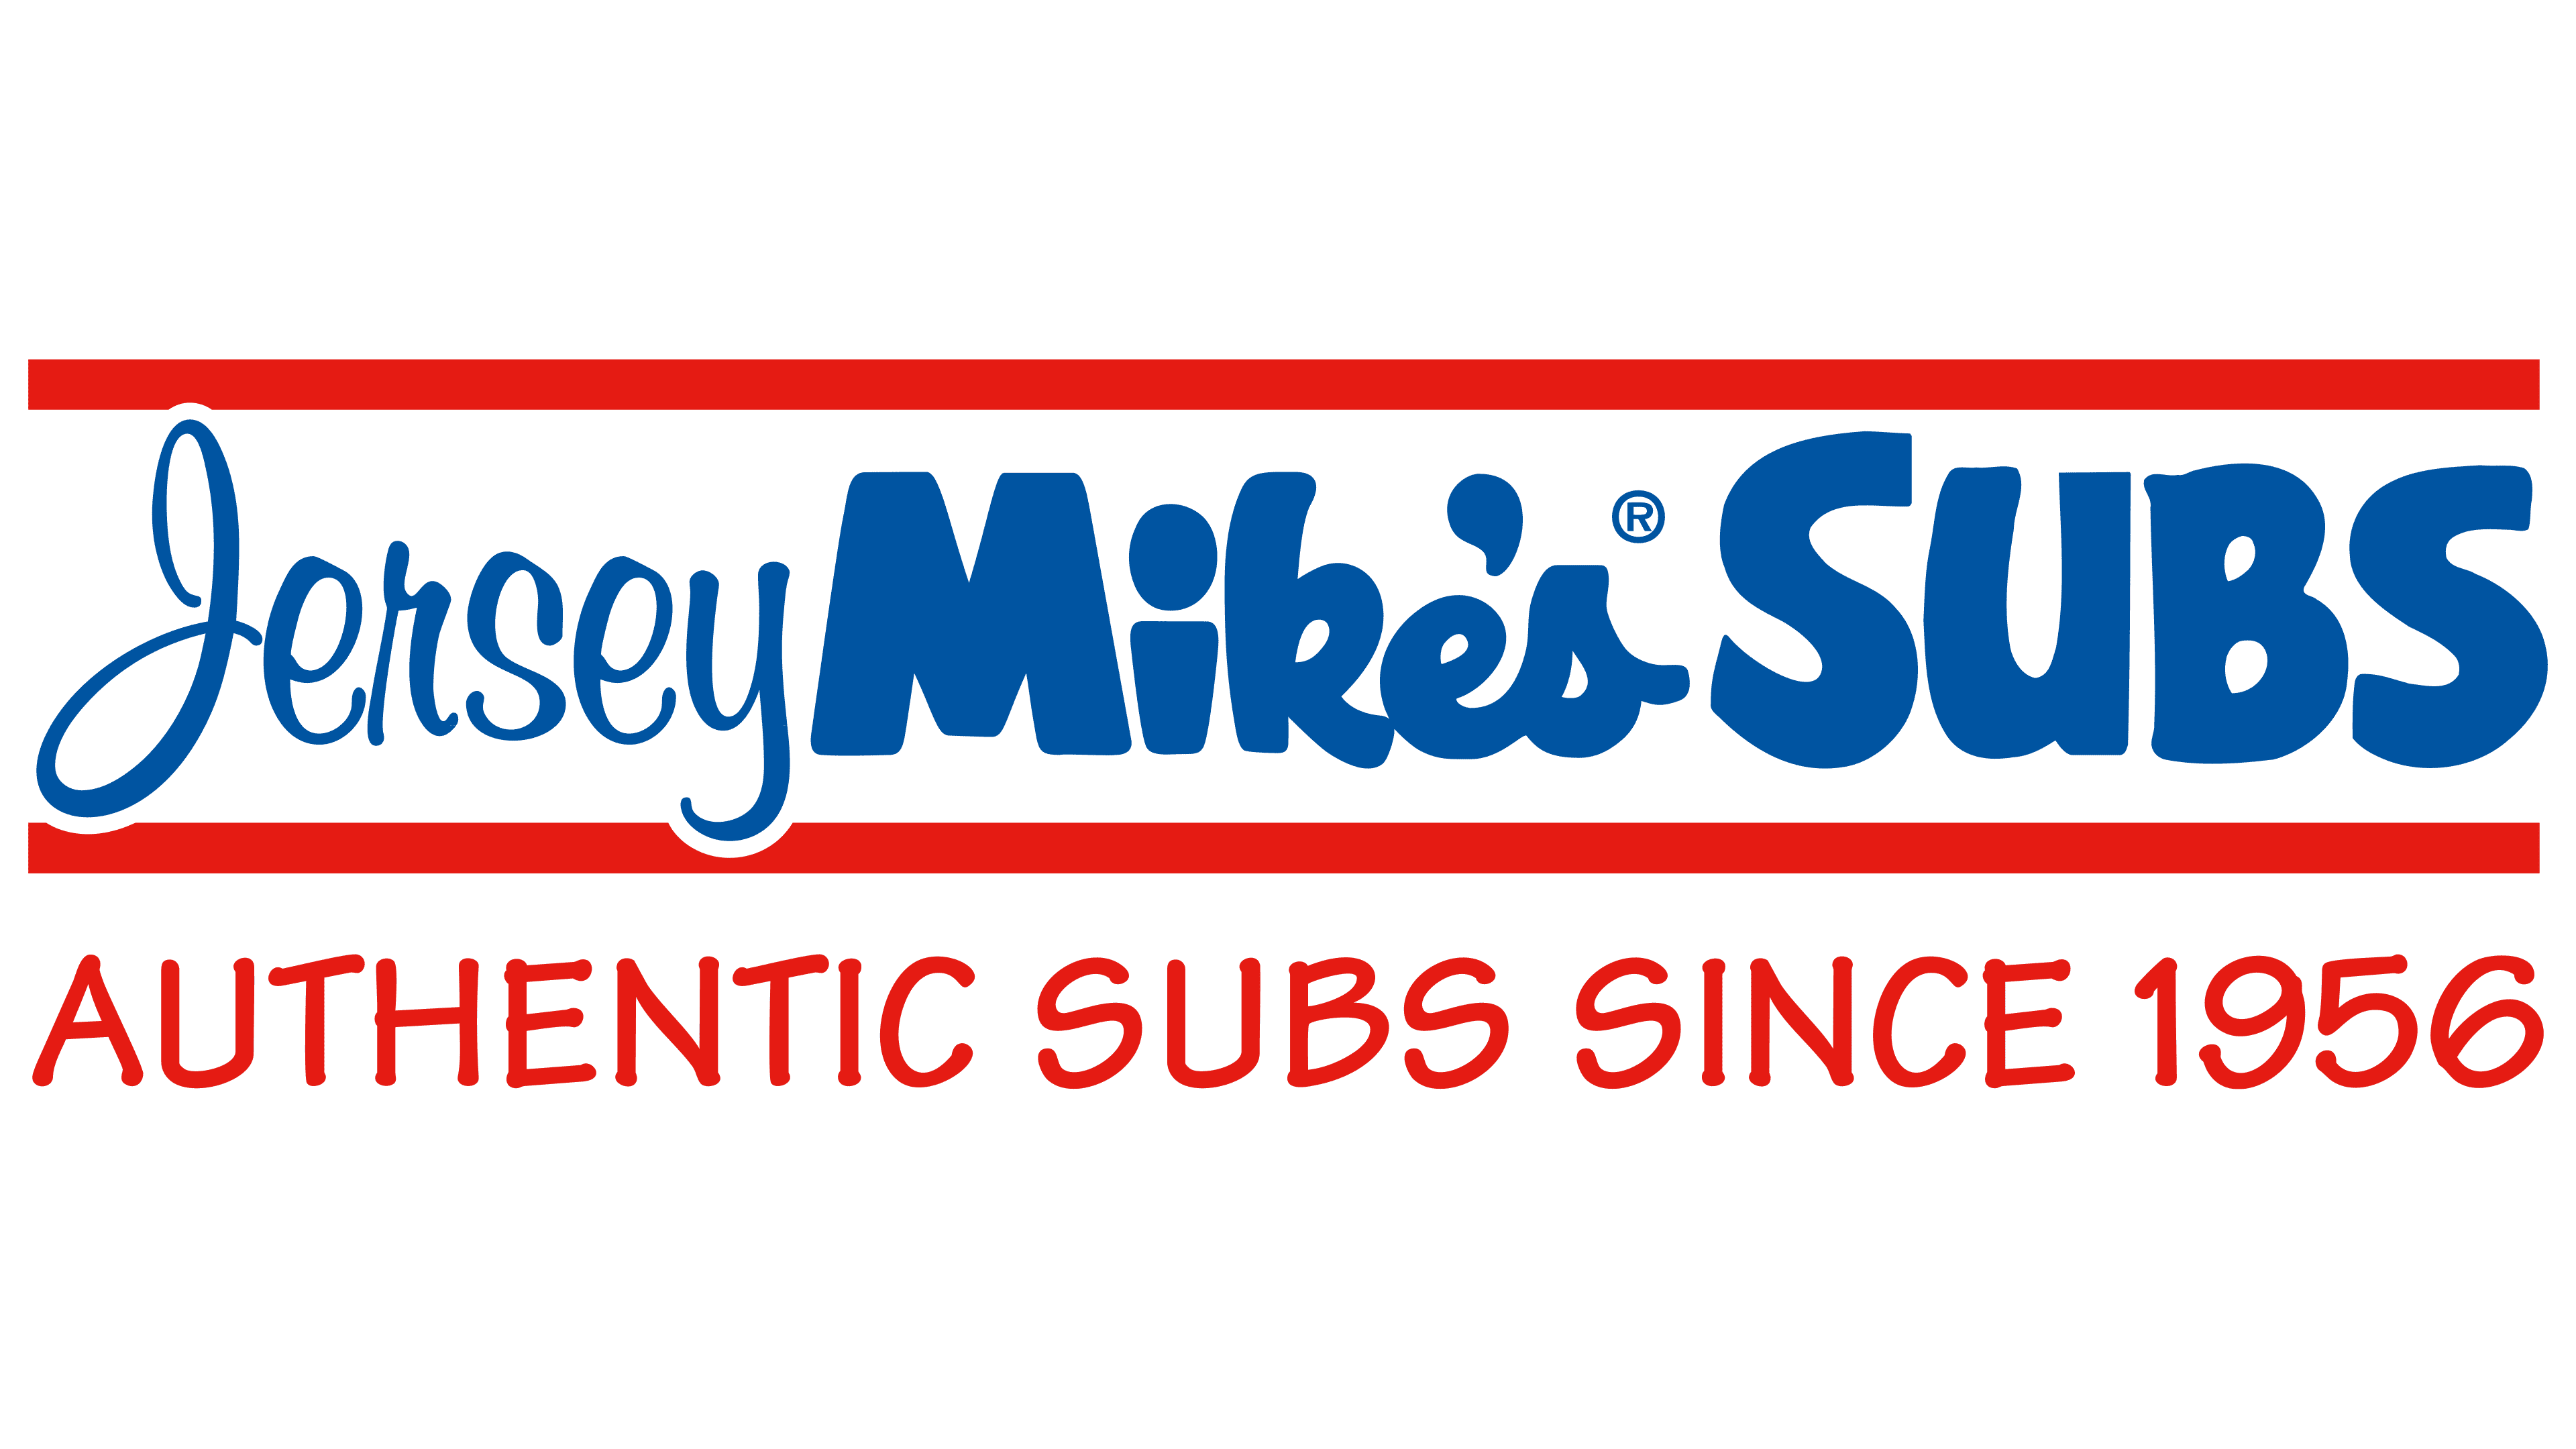 Jersey Mikes Logo, symbol, meaning, history, PNG, brand